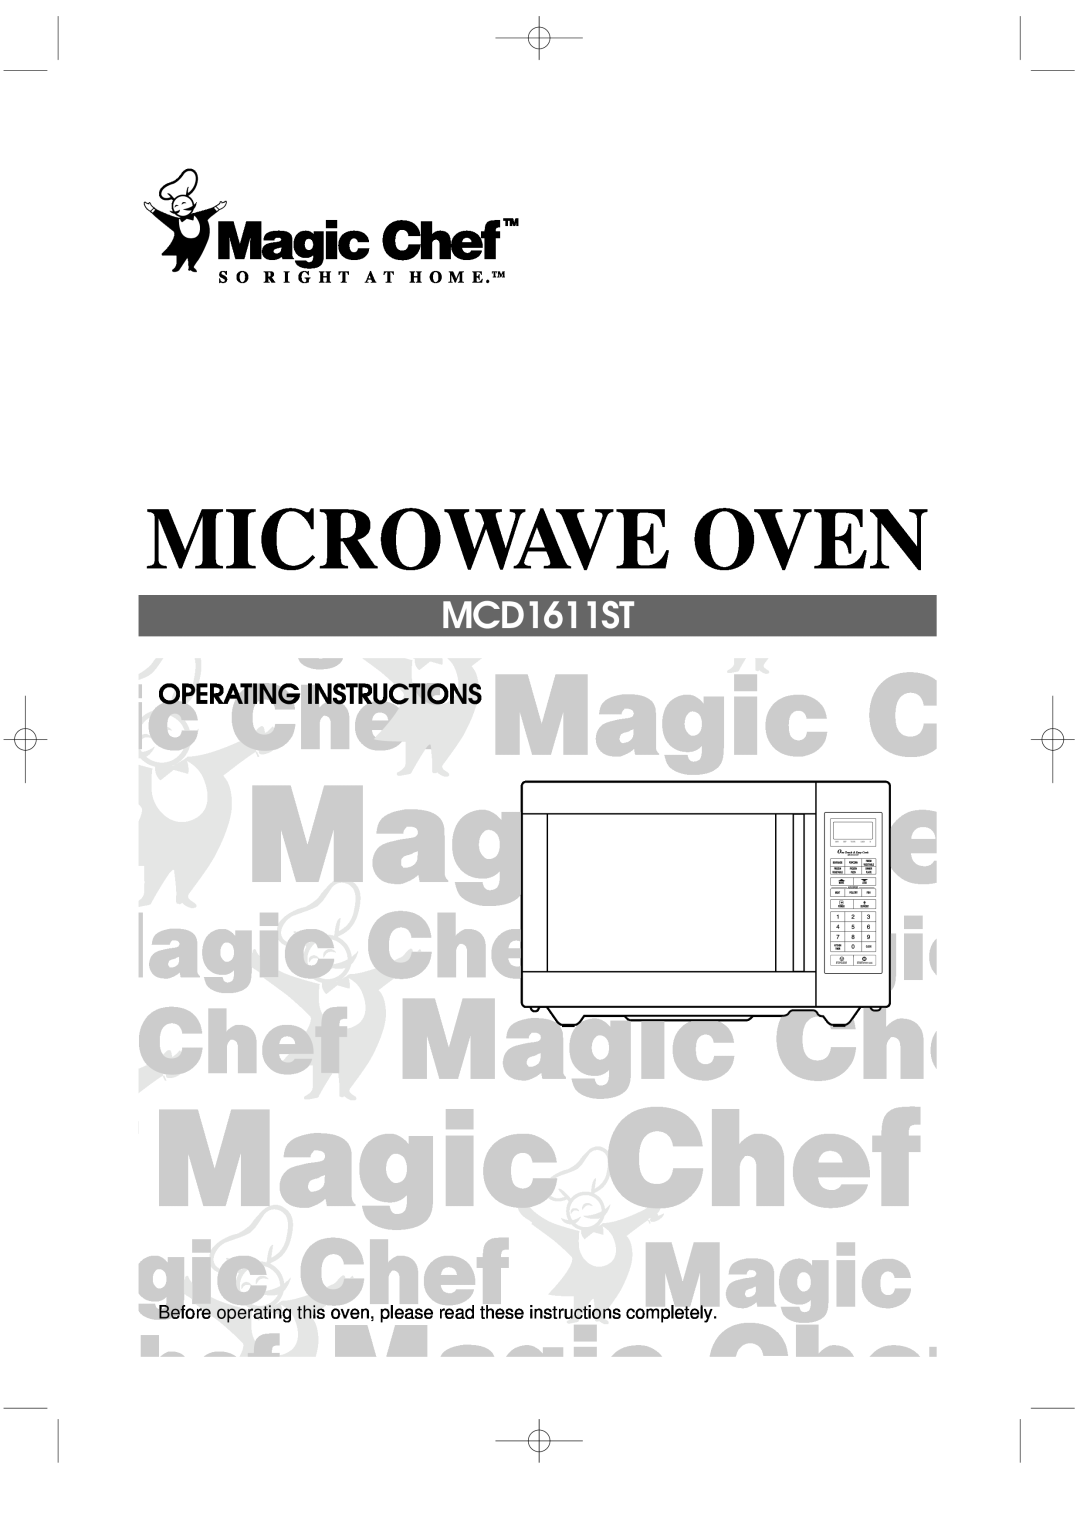 Magic Chef MCD1611ST manual Microwave Oven, Operating Instructions 